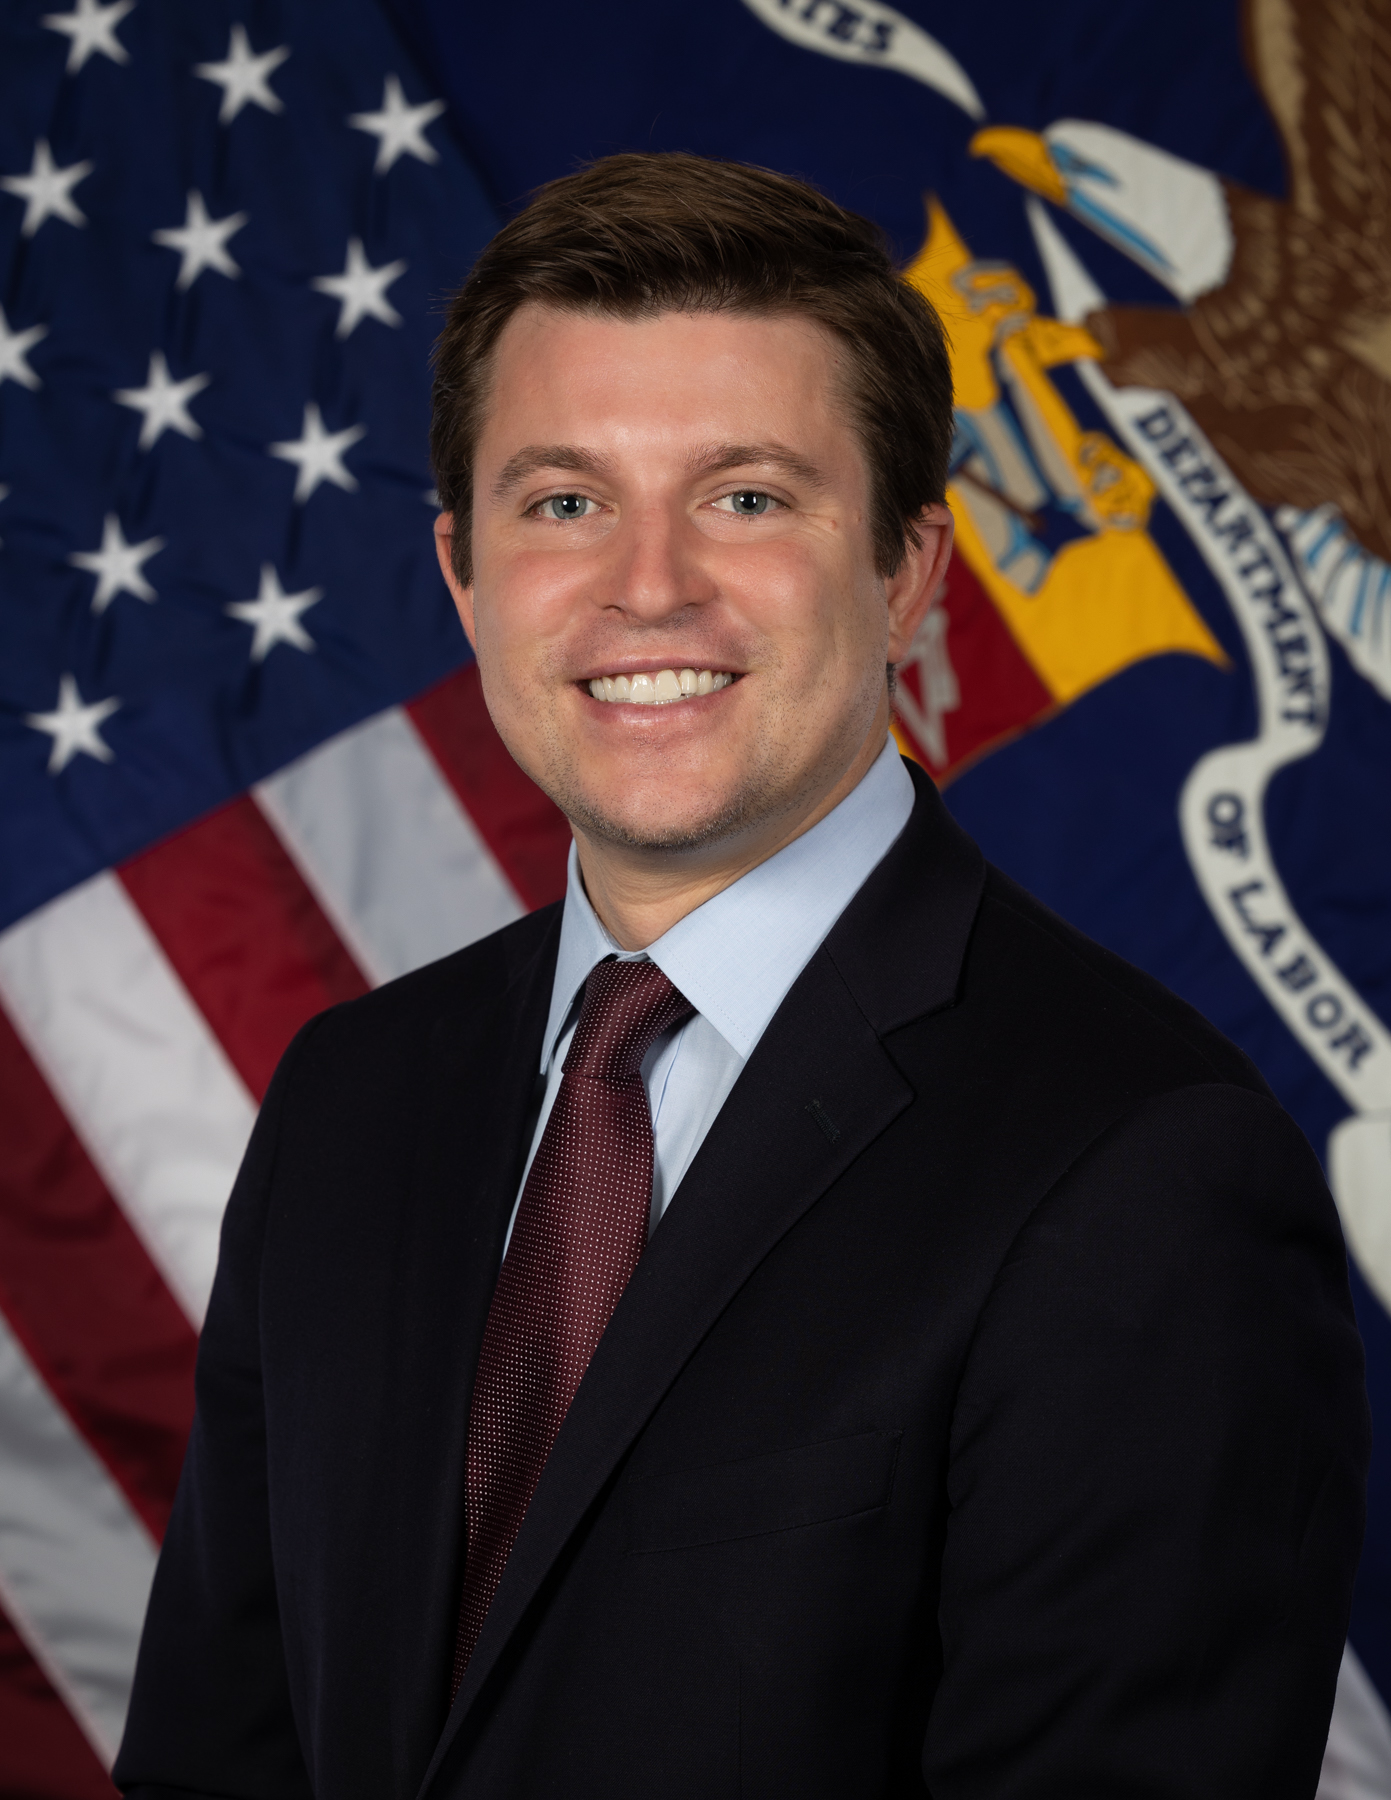 Official portrait of Brent Parton shows a man in business jacket smiling in front of the U.S. and Department of Labor flags.